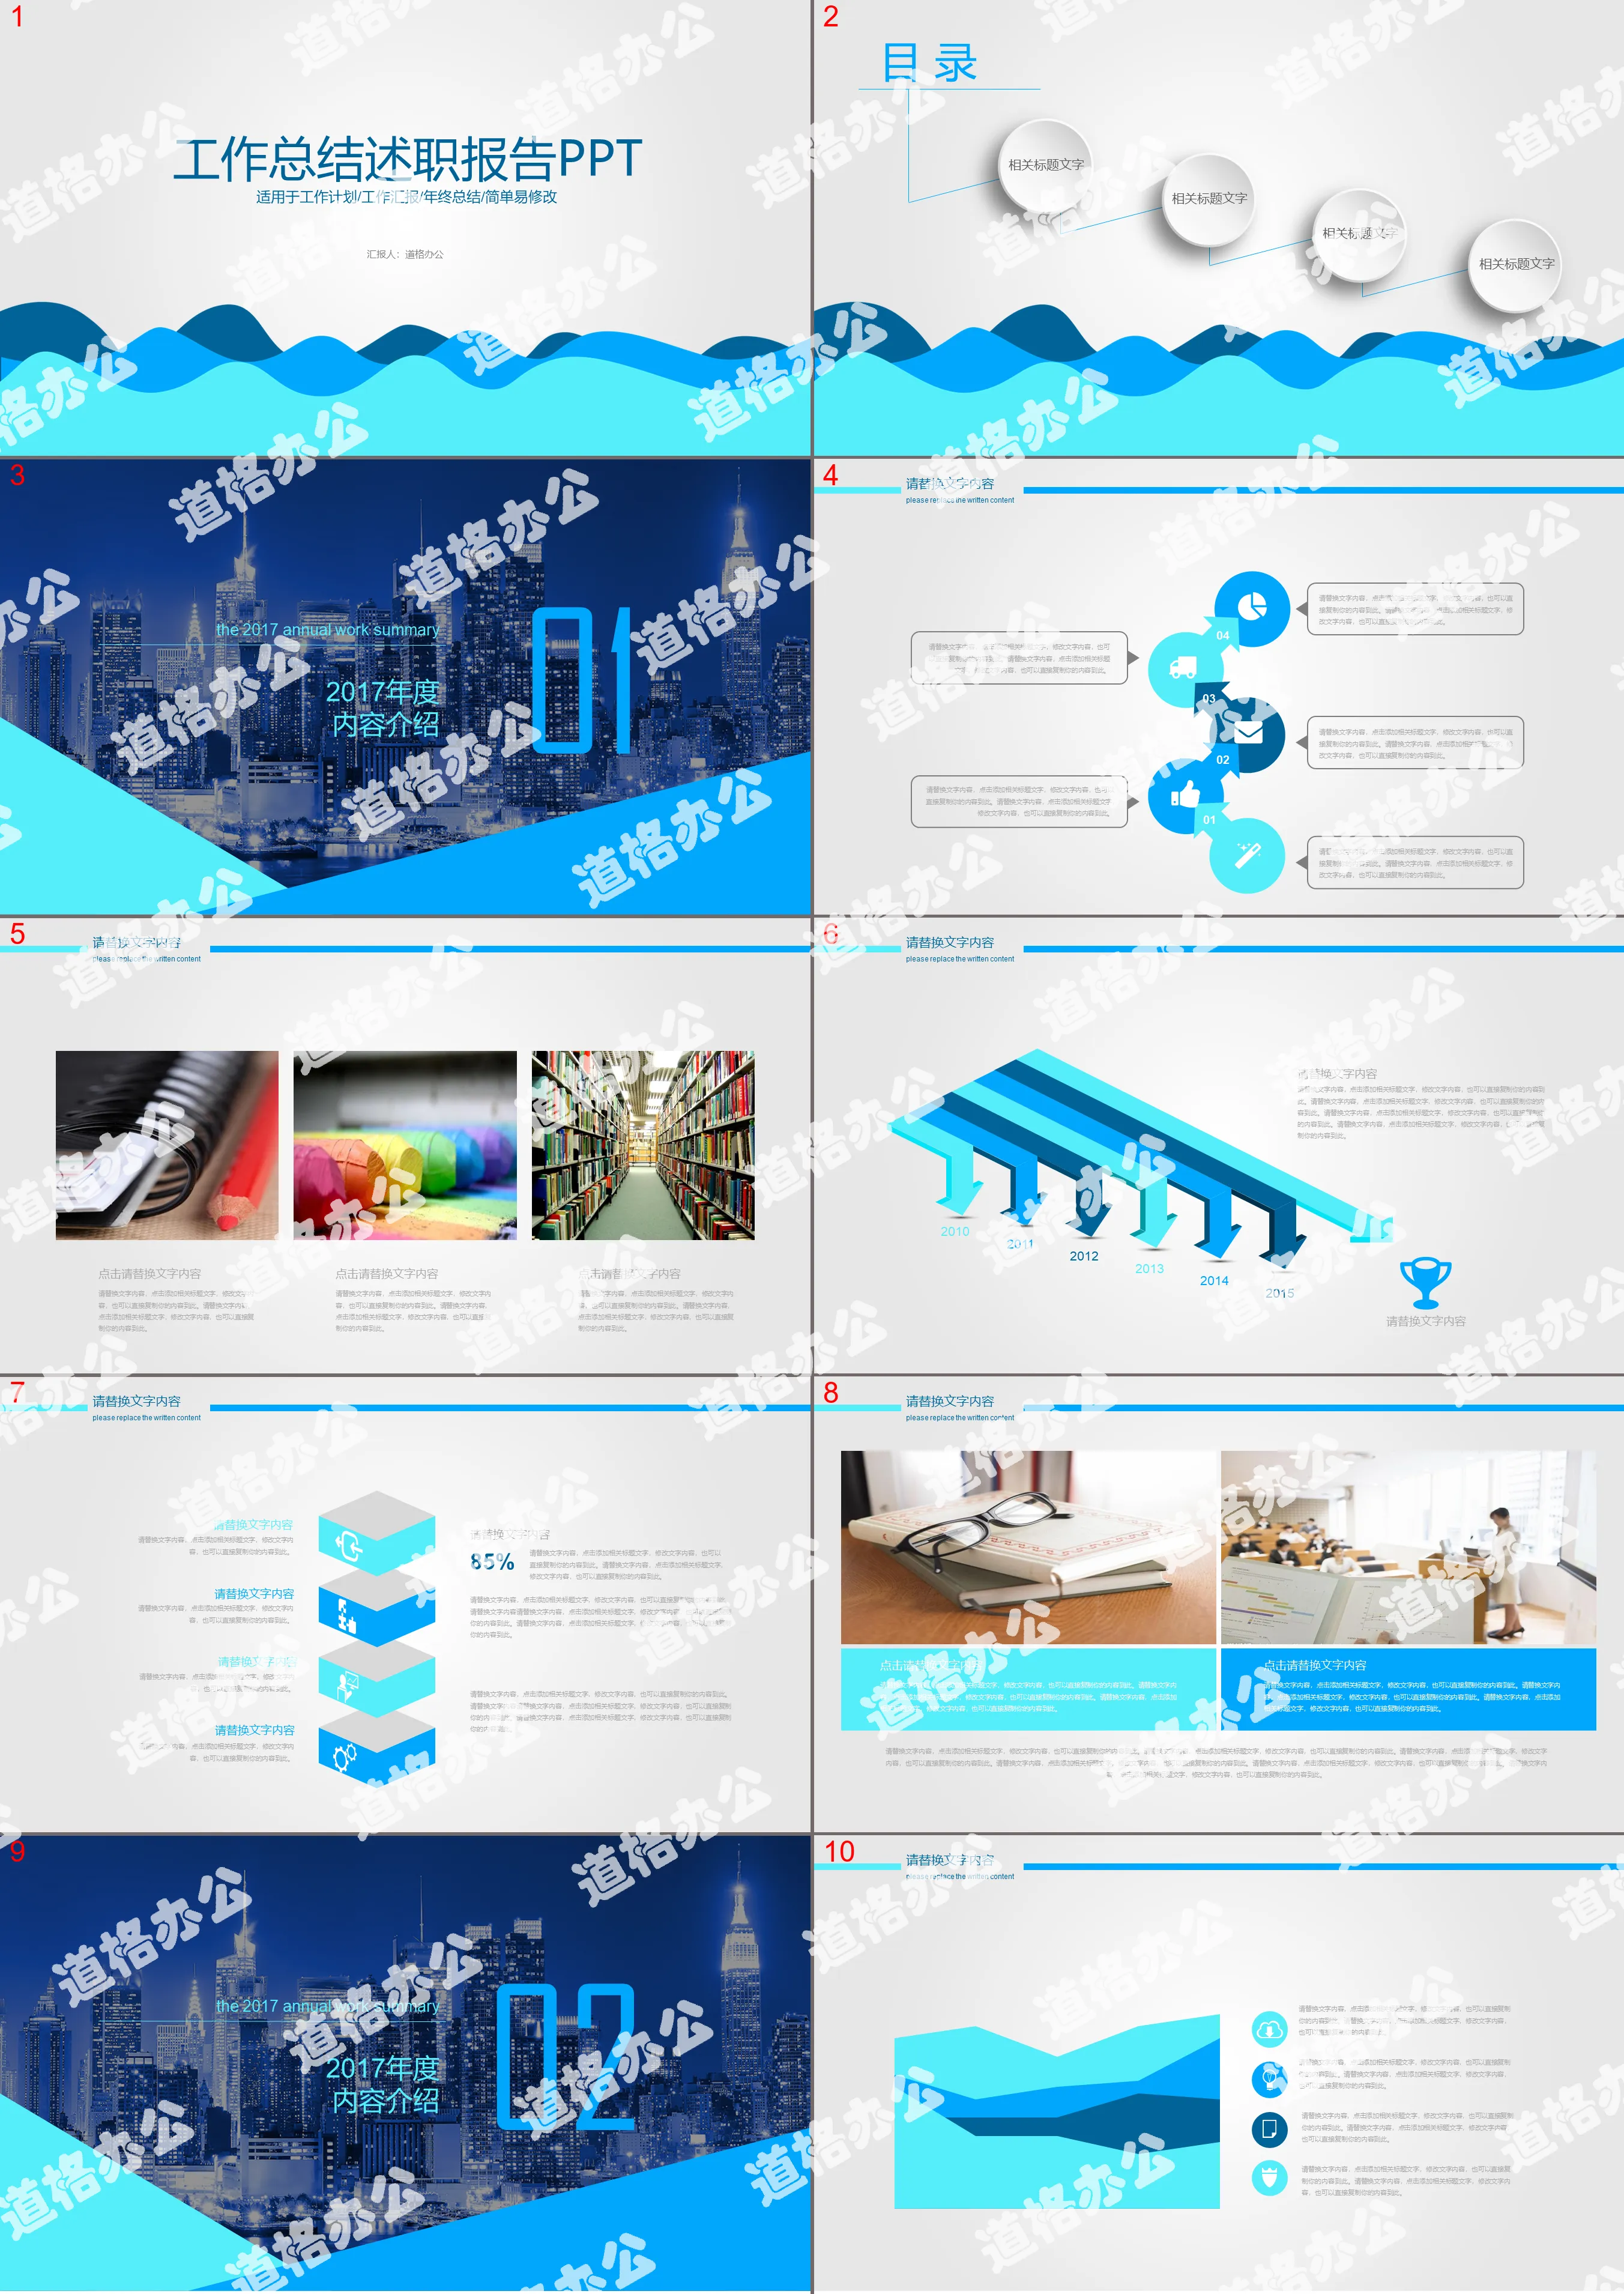 Debriefing report PPT template with simple blue ripple background